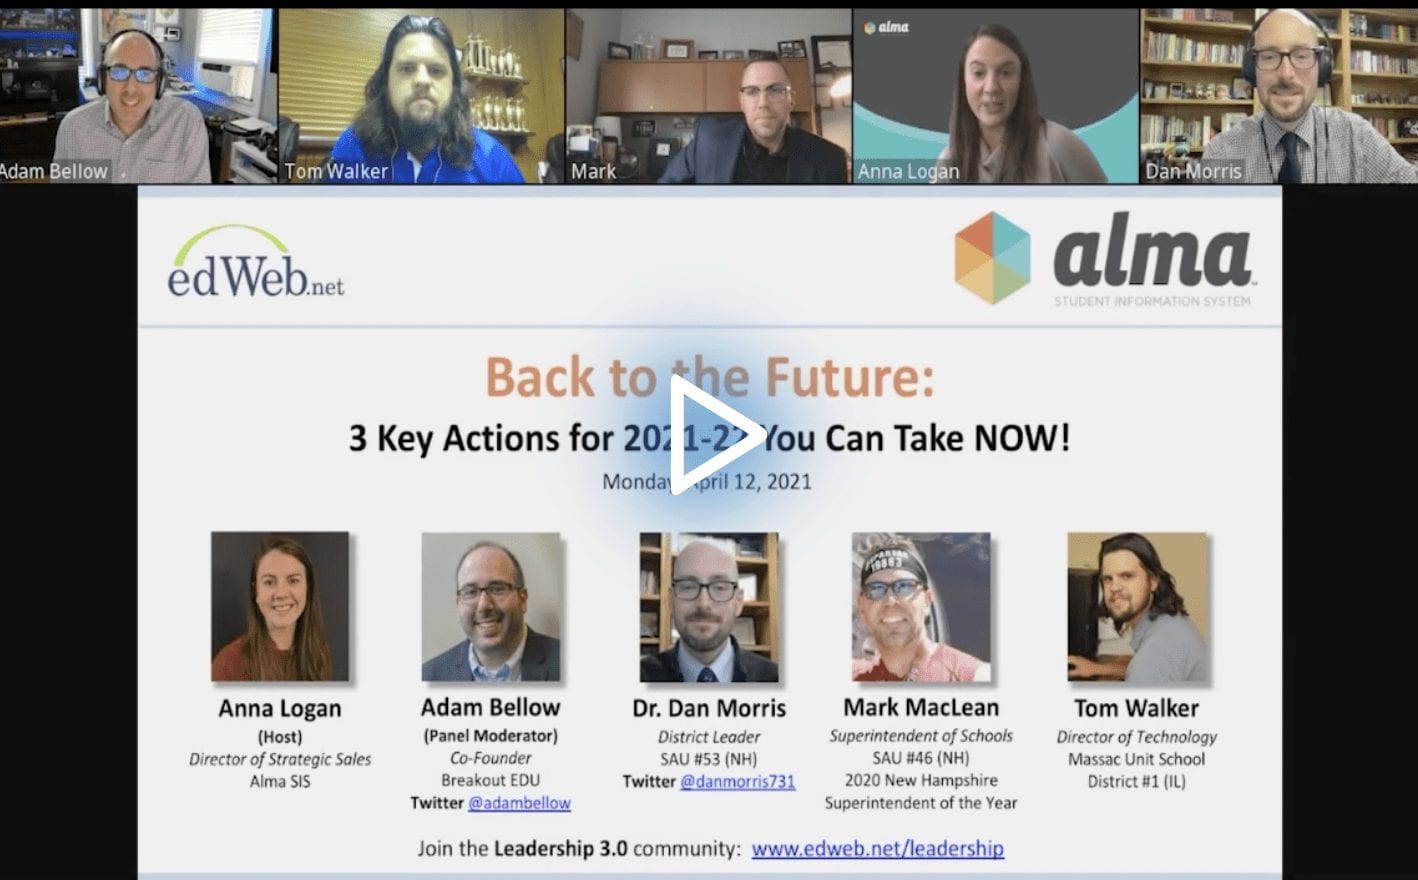 Back to the Future: 3 Key Actions for 2021-22 You Can Take NOW! edLeader Panel recording link